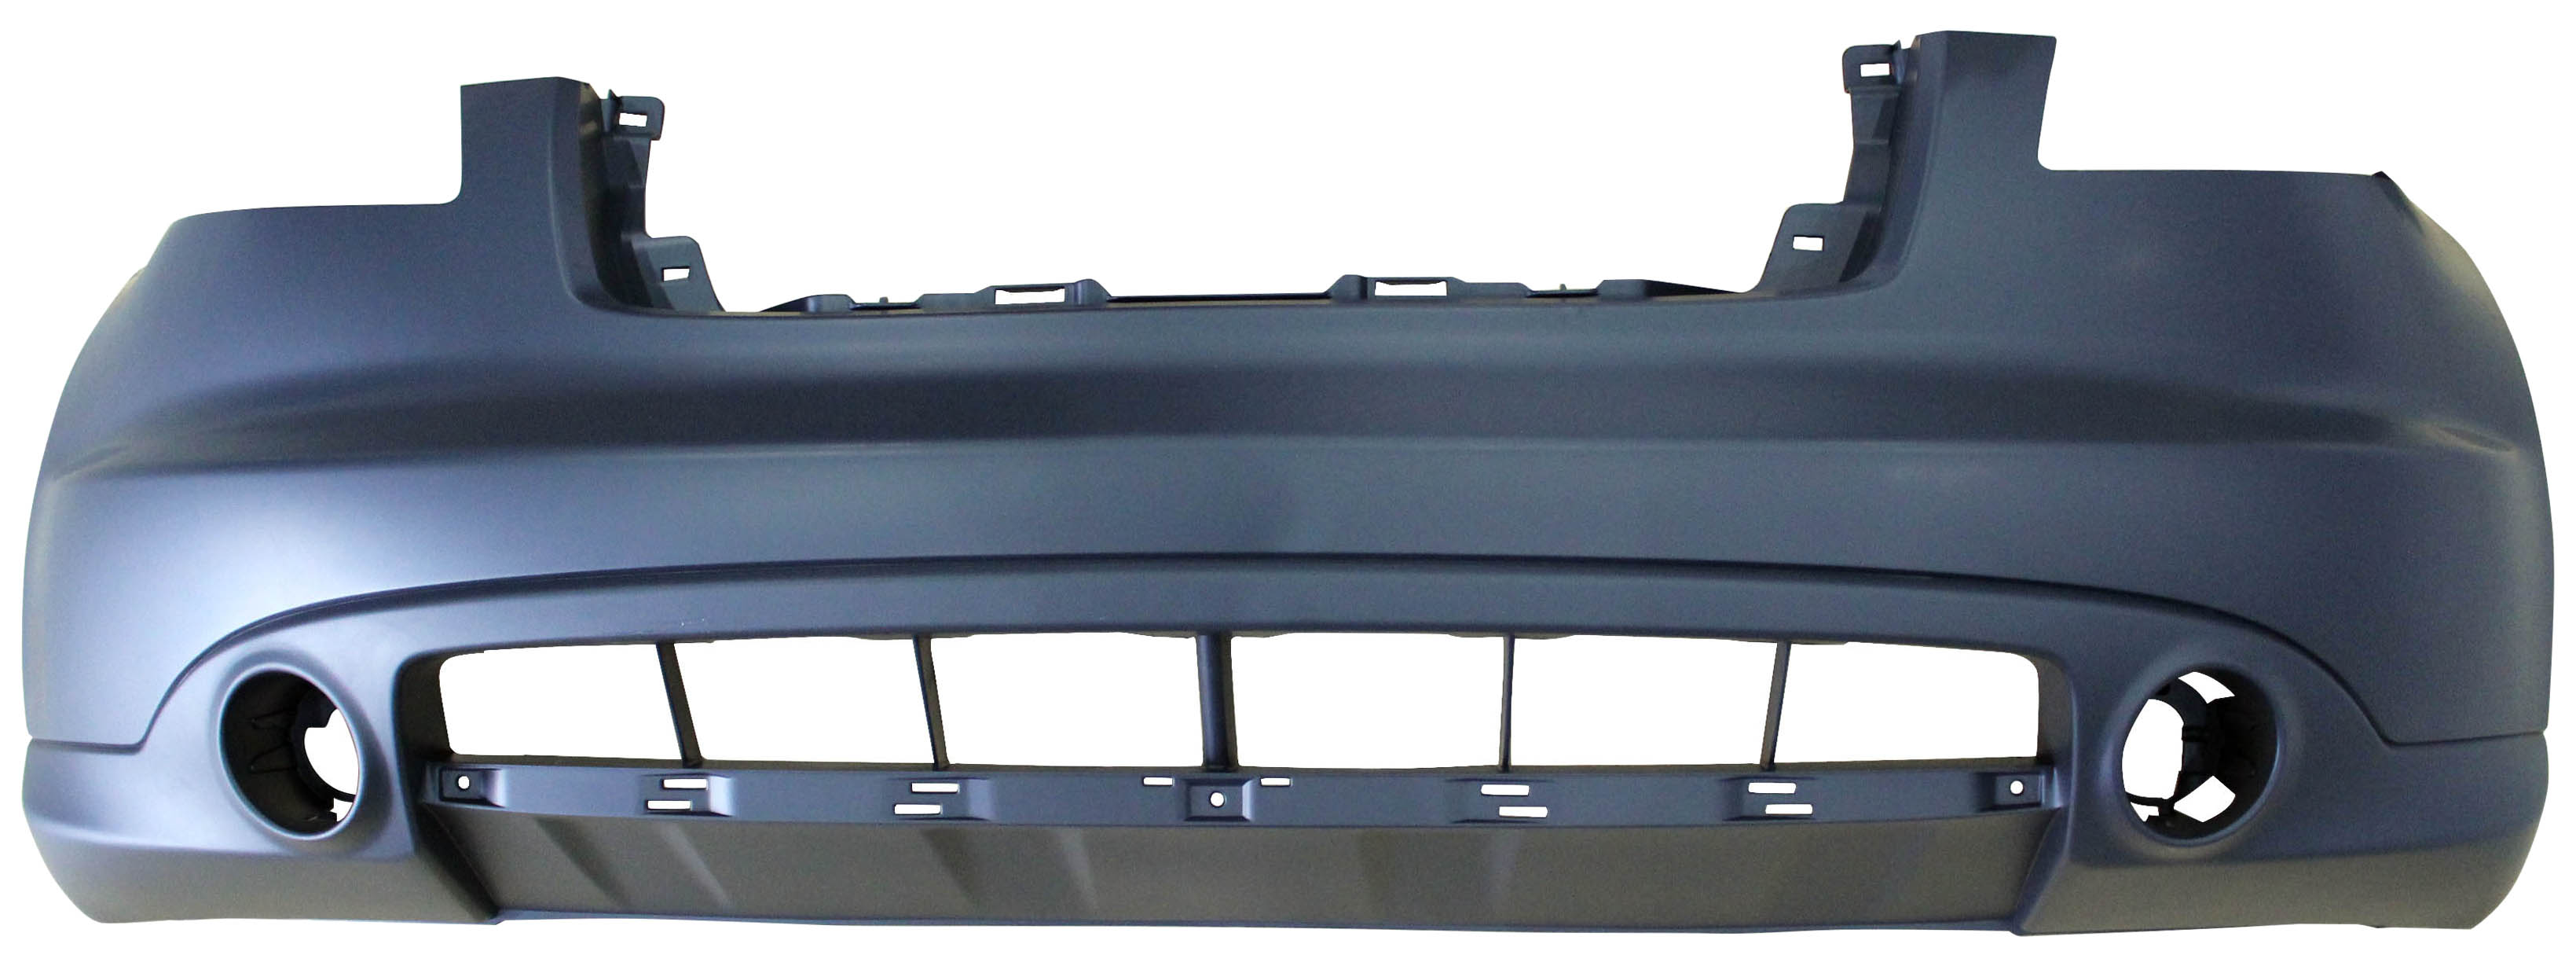 Aftermarket BUMPER COVERS for INFINITI - FX45, FX45,06-07,Front bumper cover